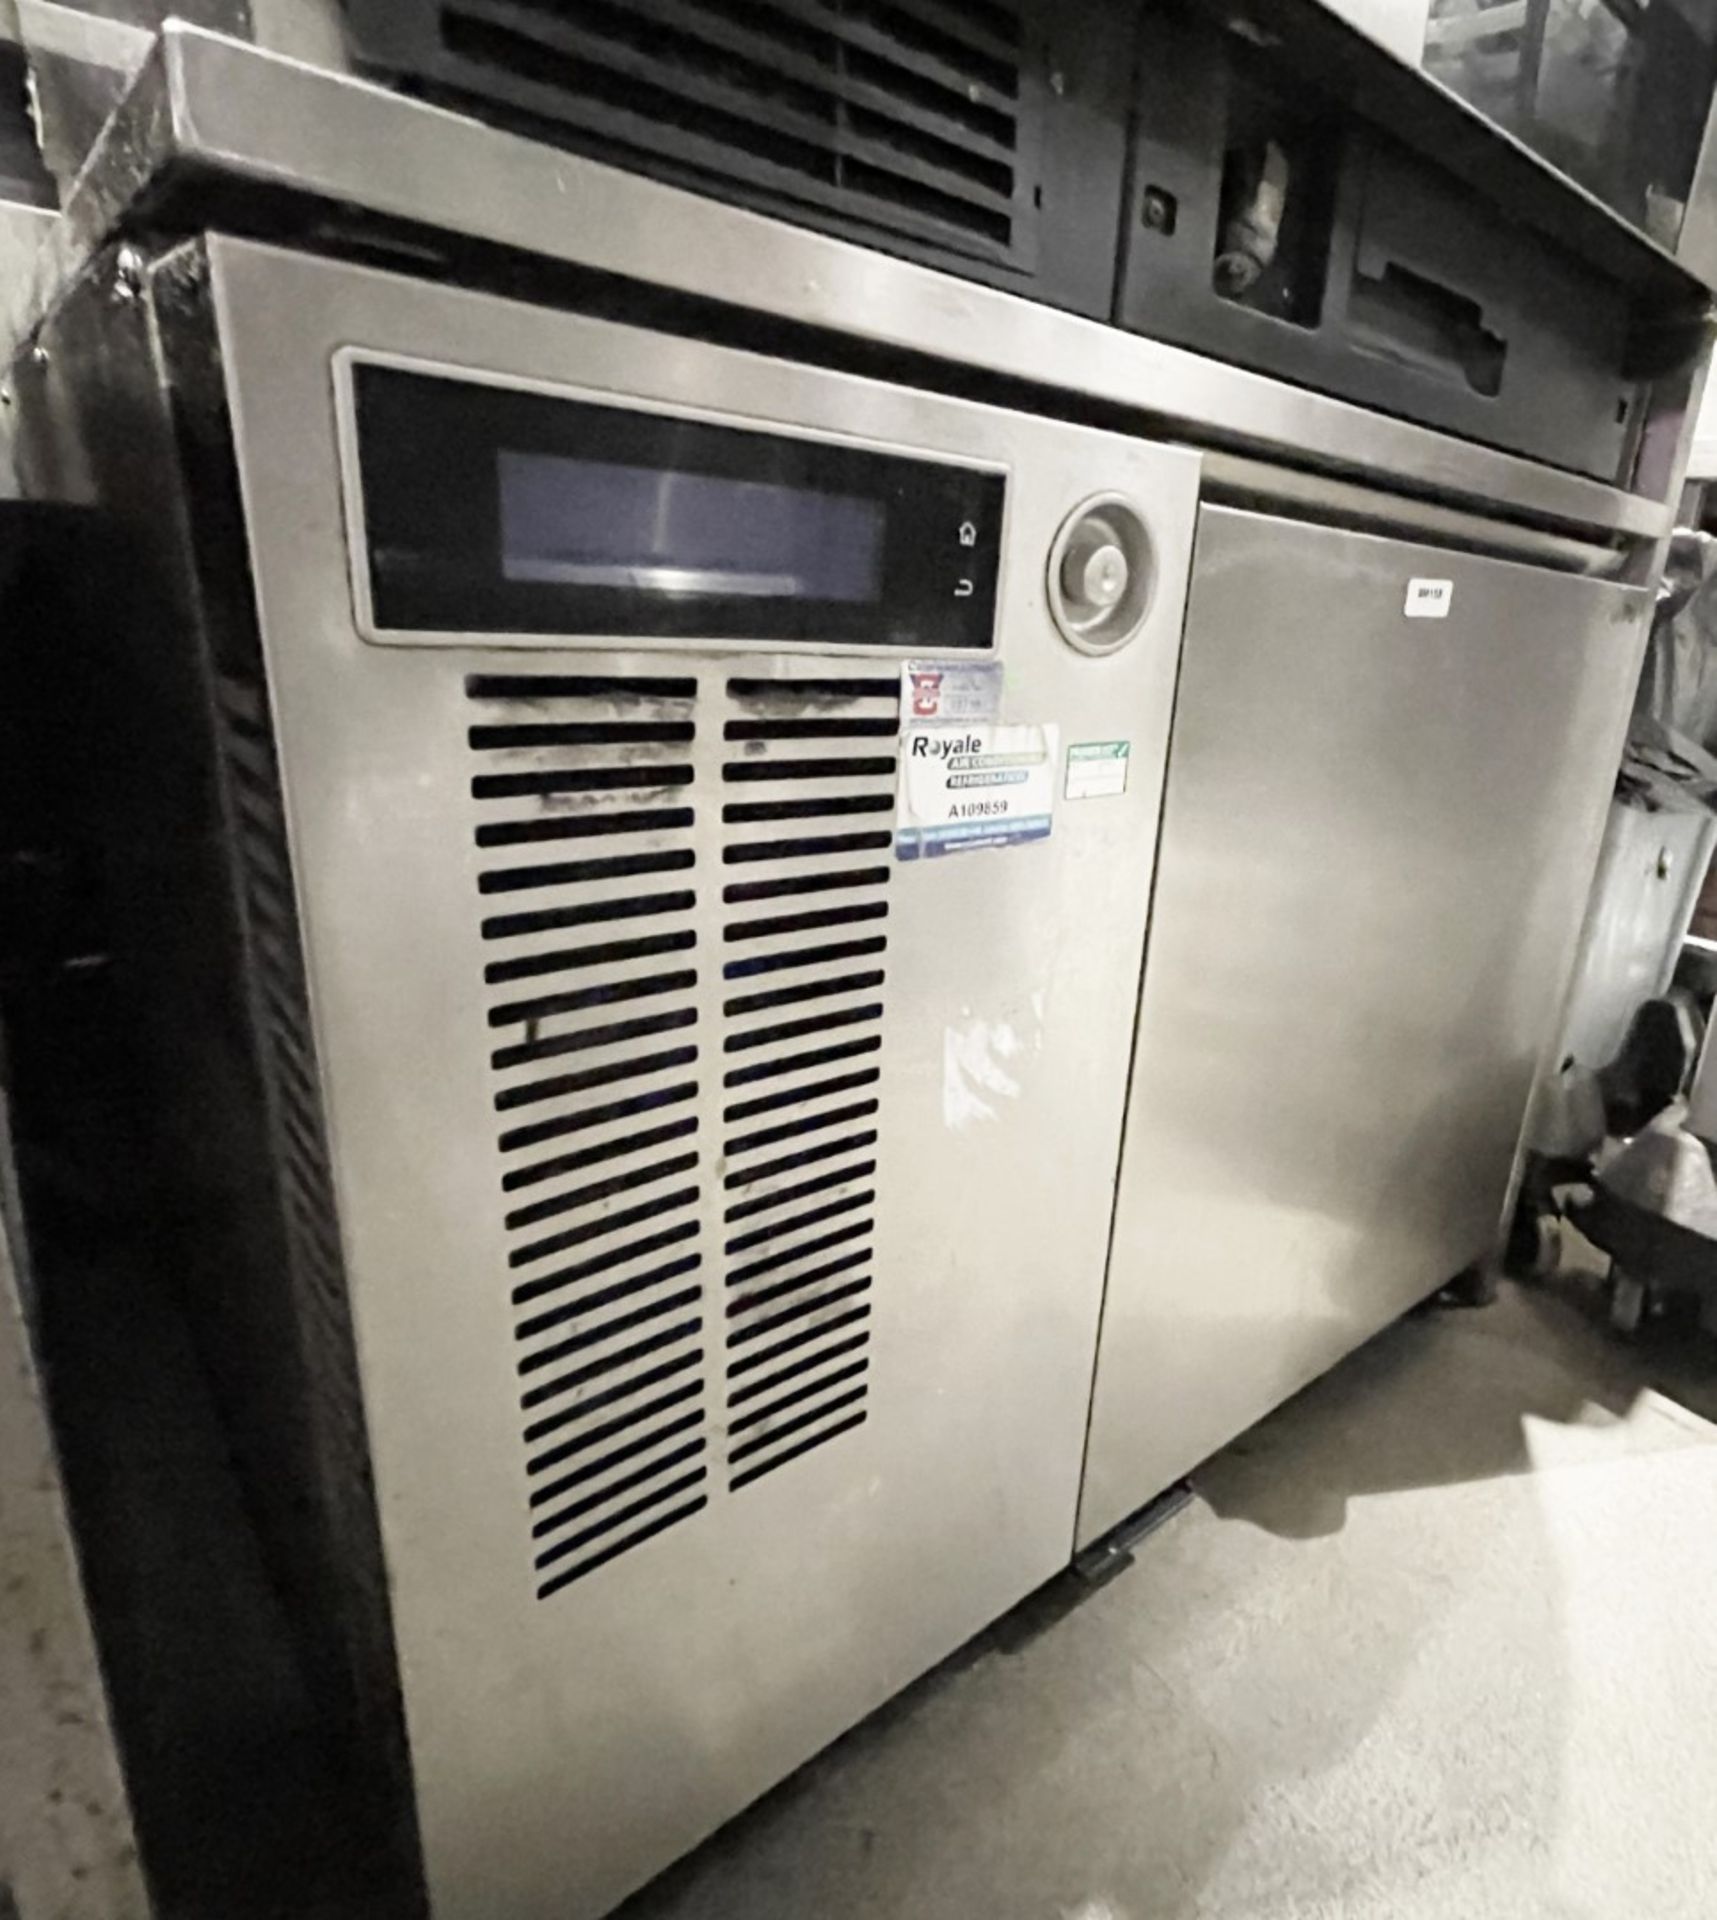 1 x Angelo Po XS51H Under Oven Blast Chiller and Freezer - 10/16KG Cycle - Stainless Steel - Image 2 of 6